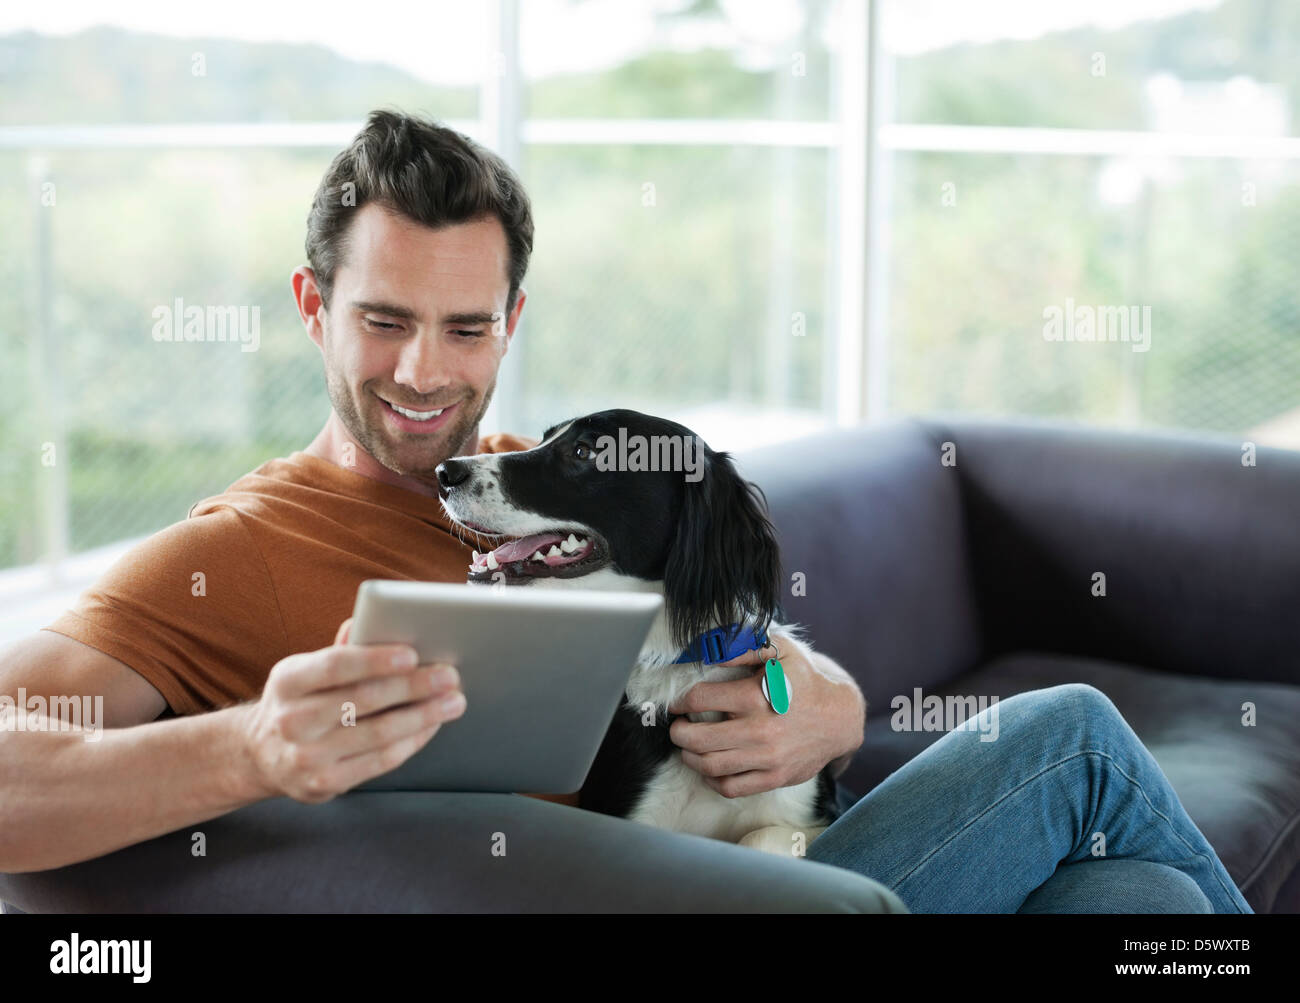 Man petting dog and using tablet computer Banque D'Images